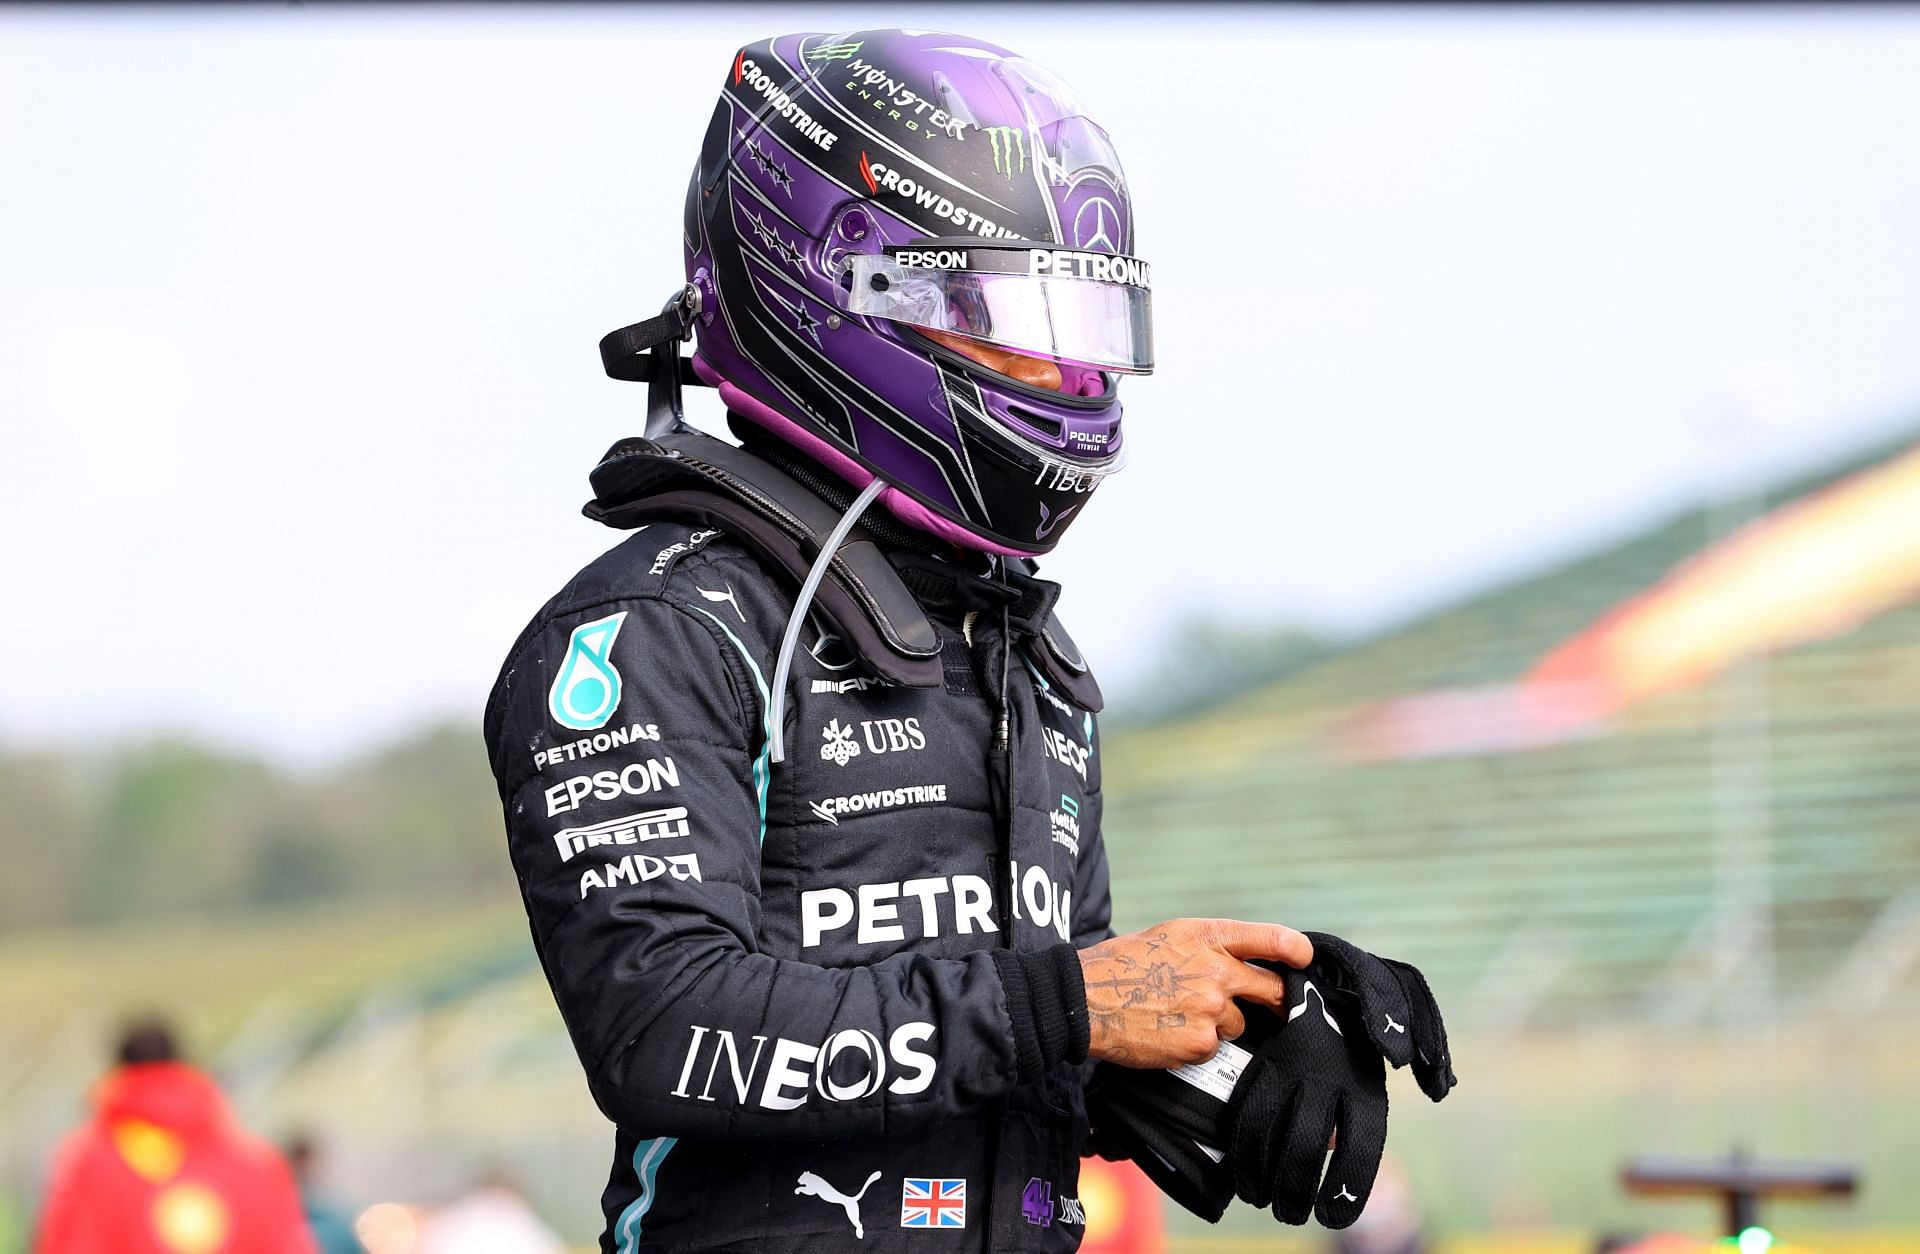 Lewis Hamilton after finishing the Emilia Romagna Grand Prix in P2 (Photo by Bryn Lennon/Getty Images)